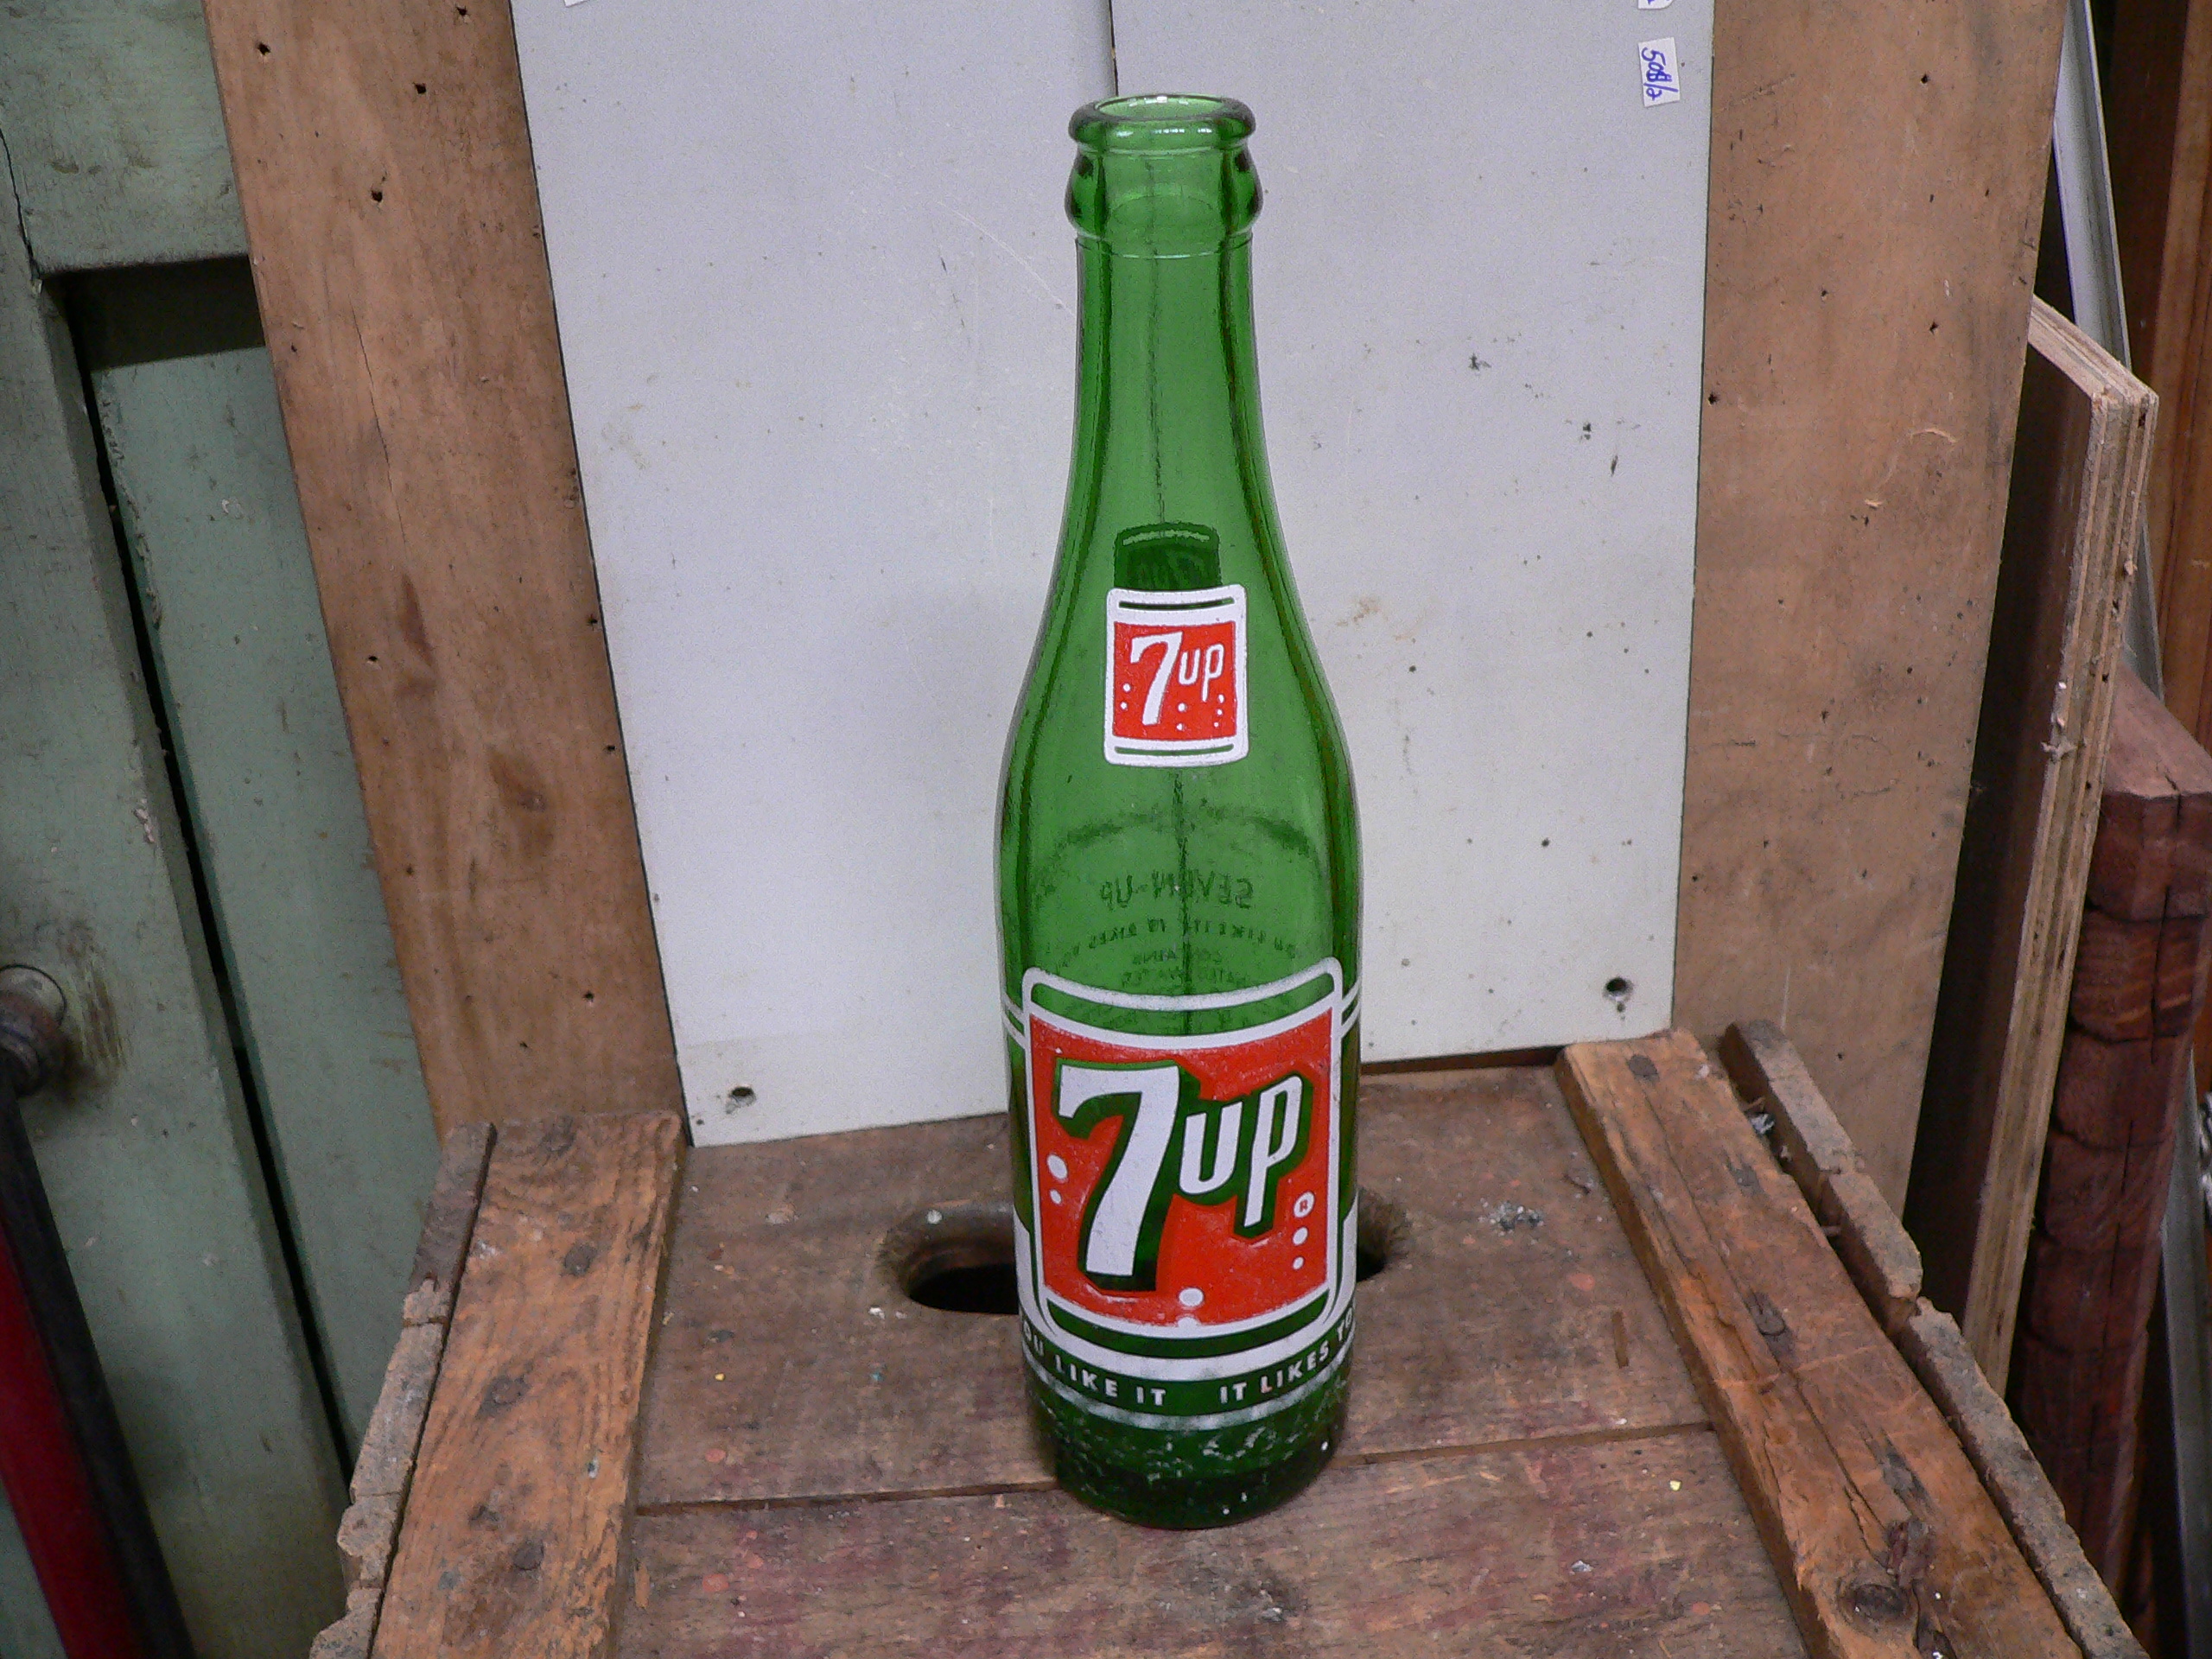 Bouteille 7 up # 5914.3 